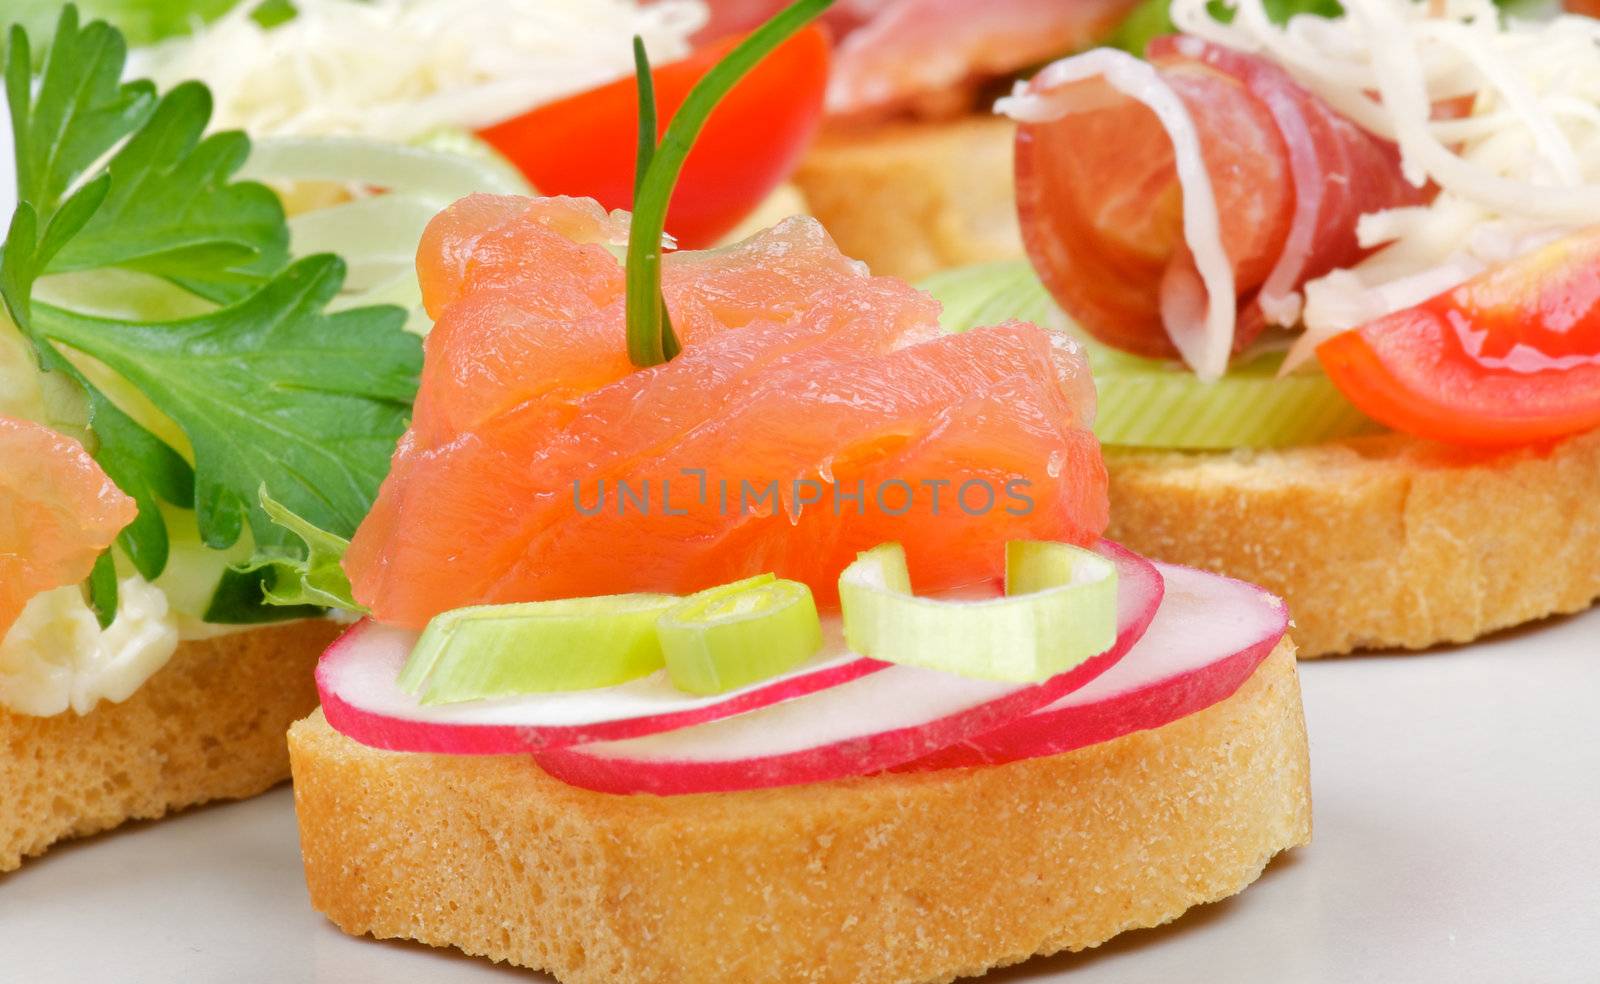 Appetizer of Smoked Salmon with Radish and Greens on gray plate and appetizers background